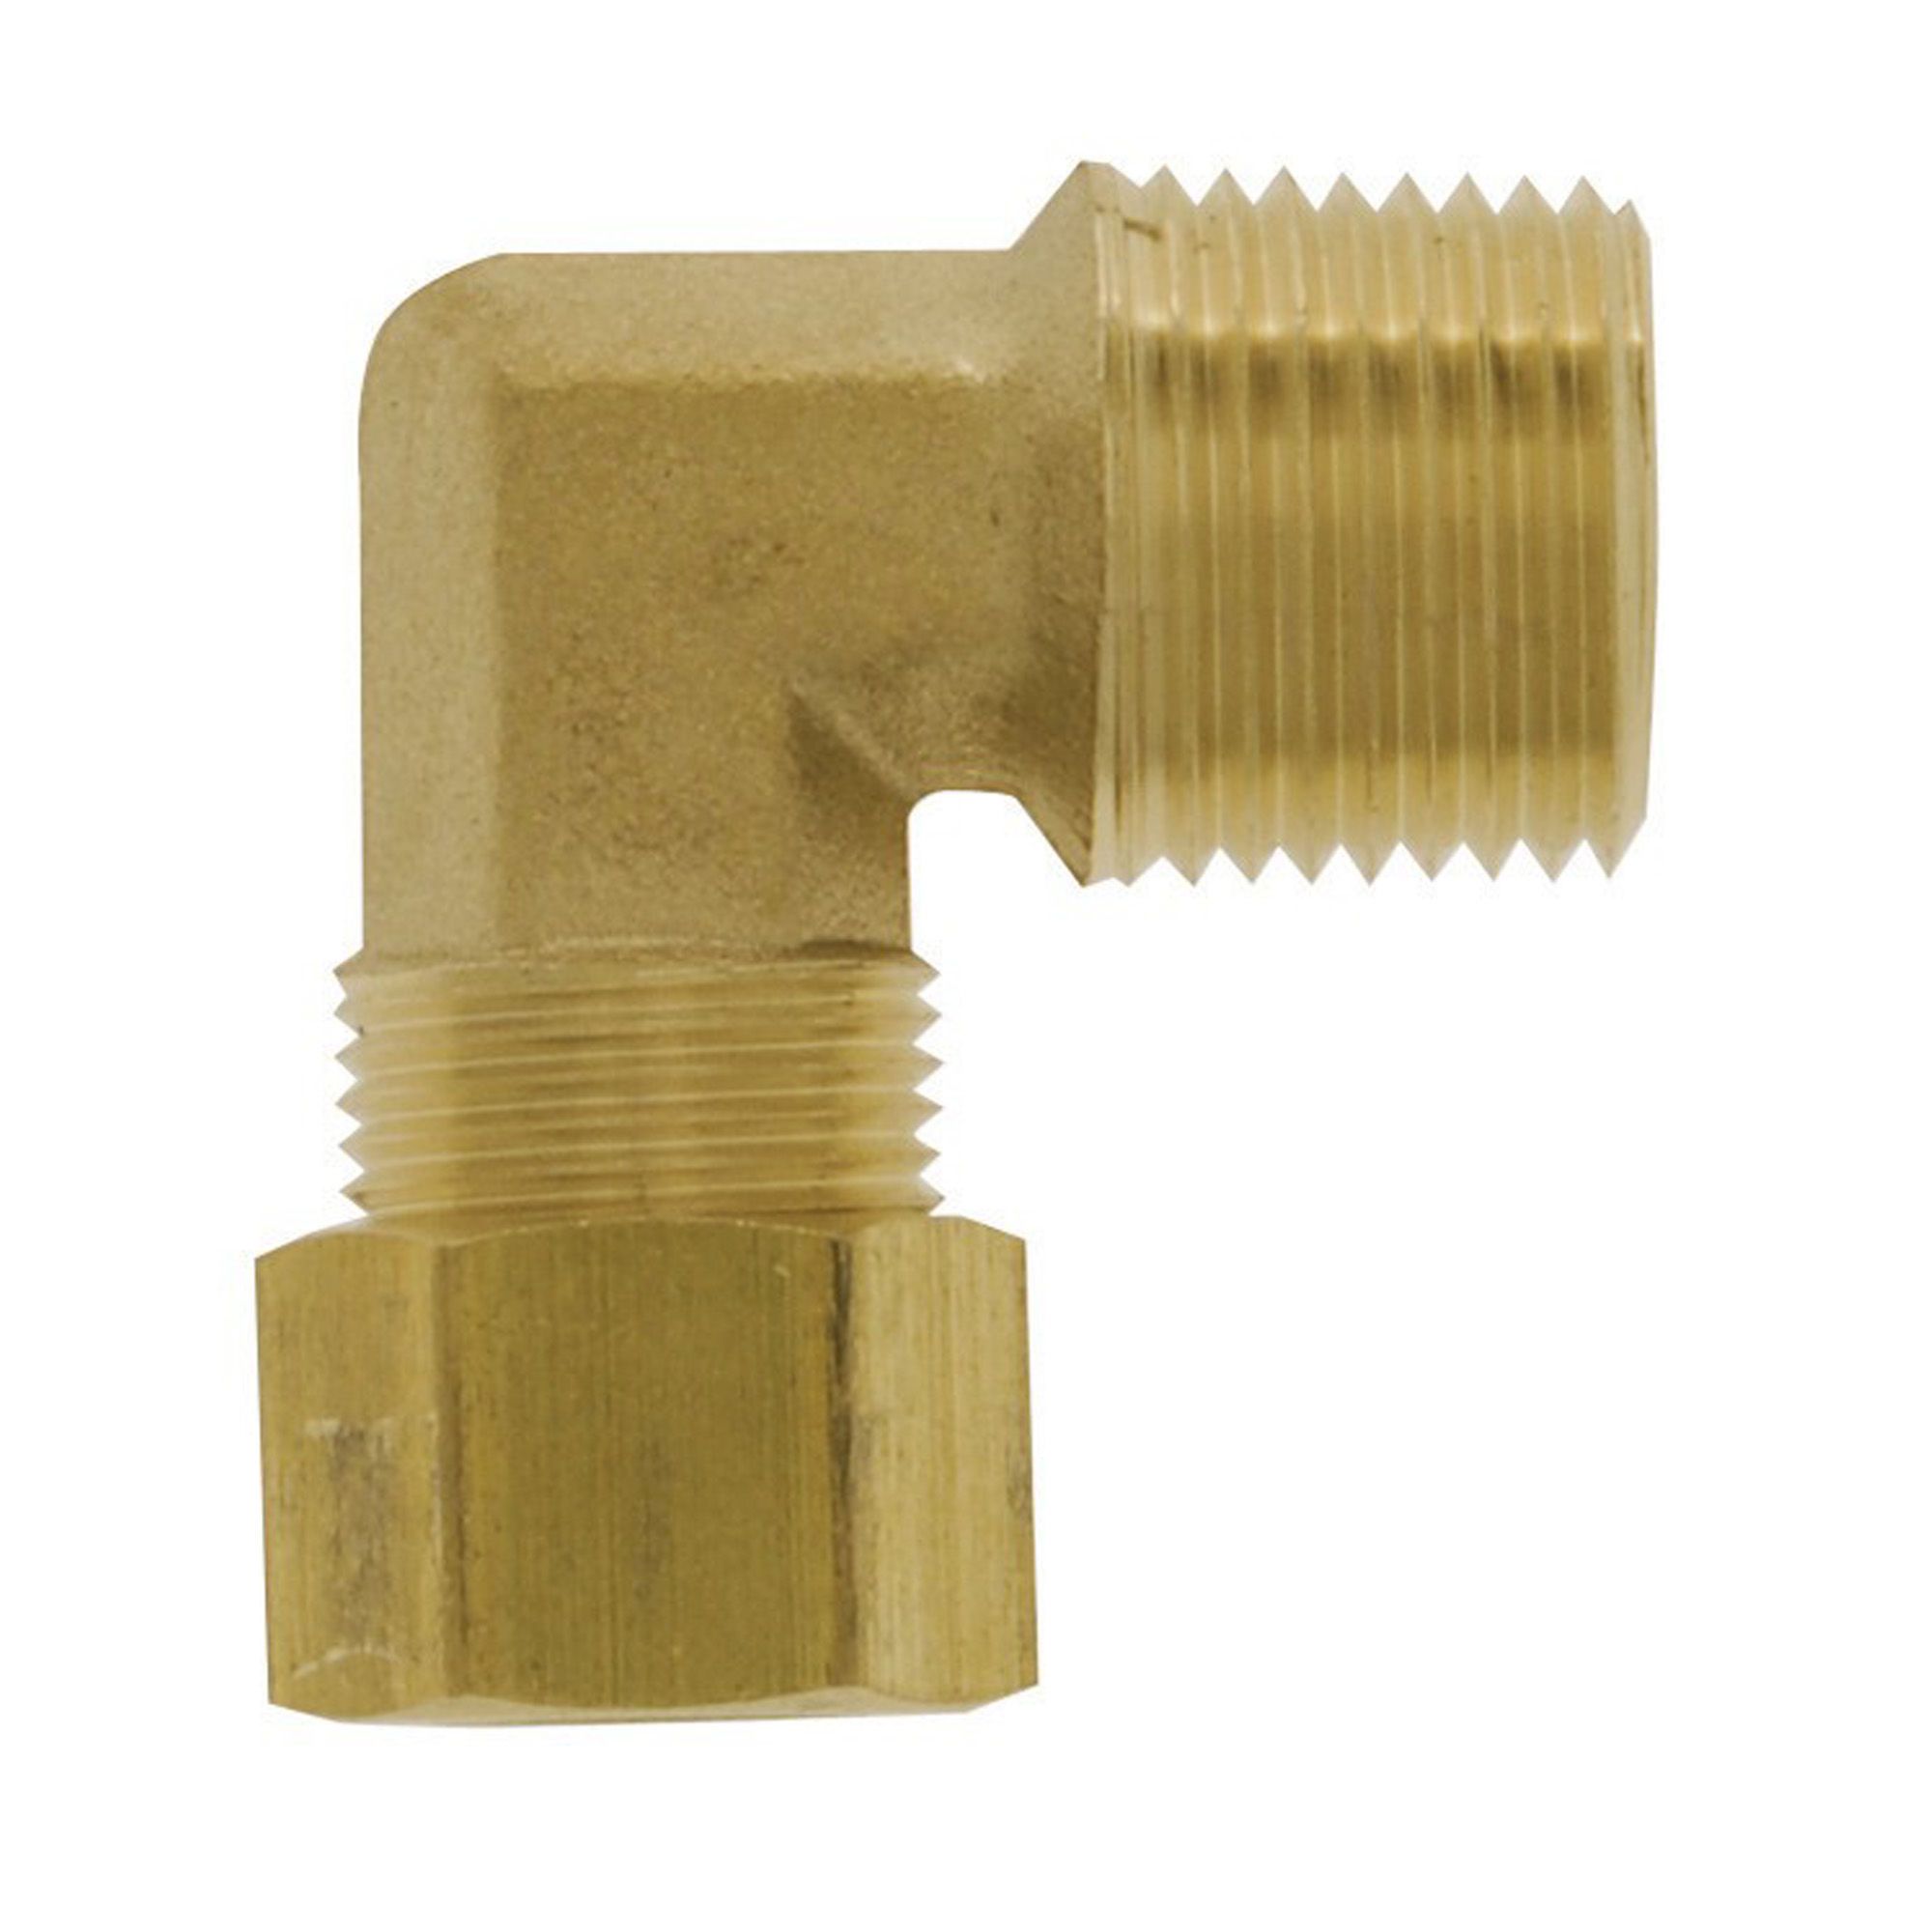 Elbow 90 degrees reduction brass 3/8 tube x 3/8 mpt compression adapter